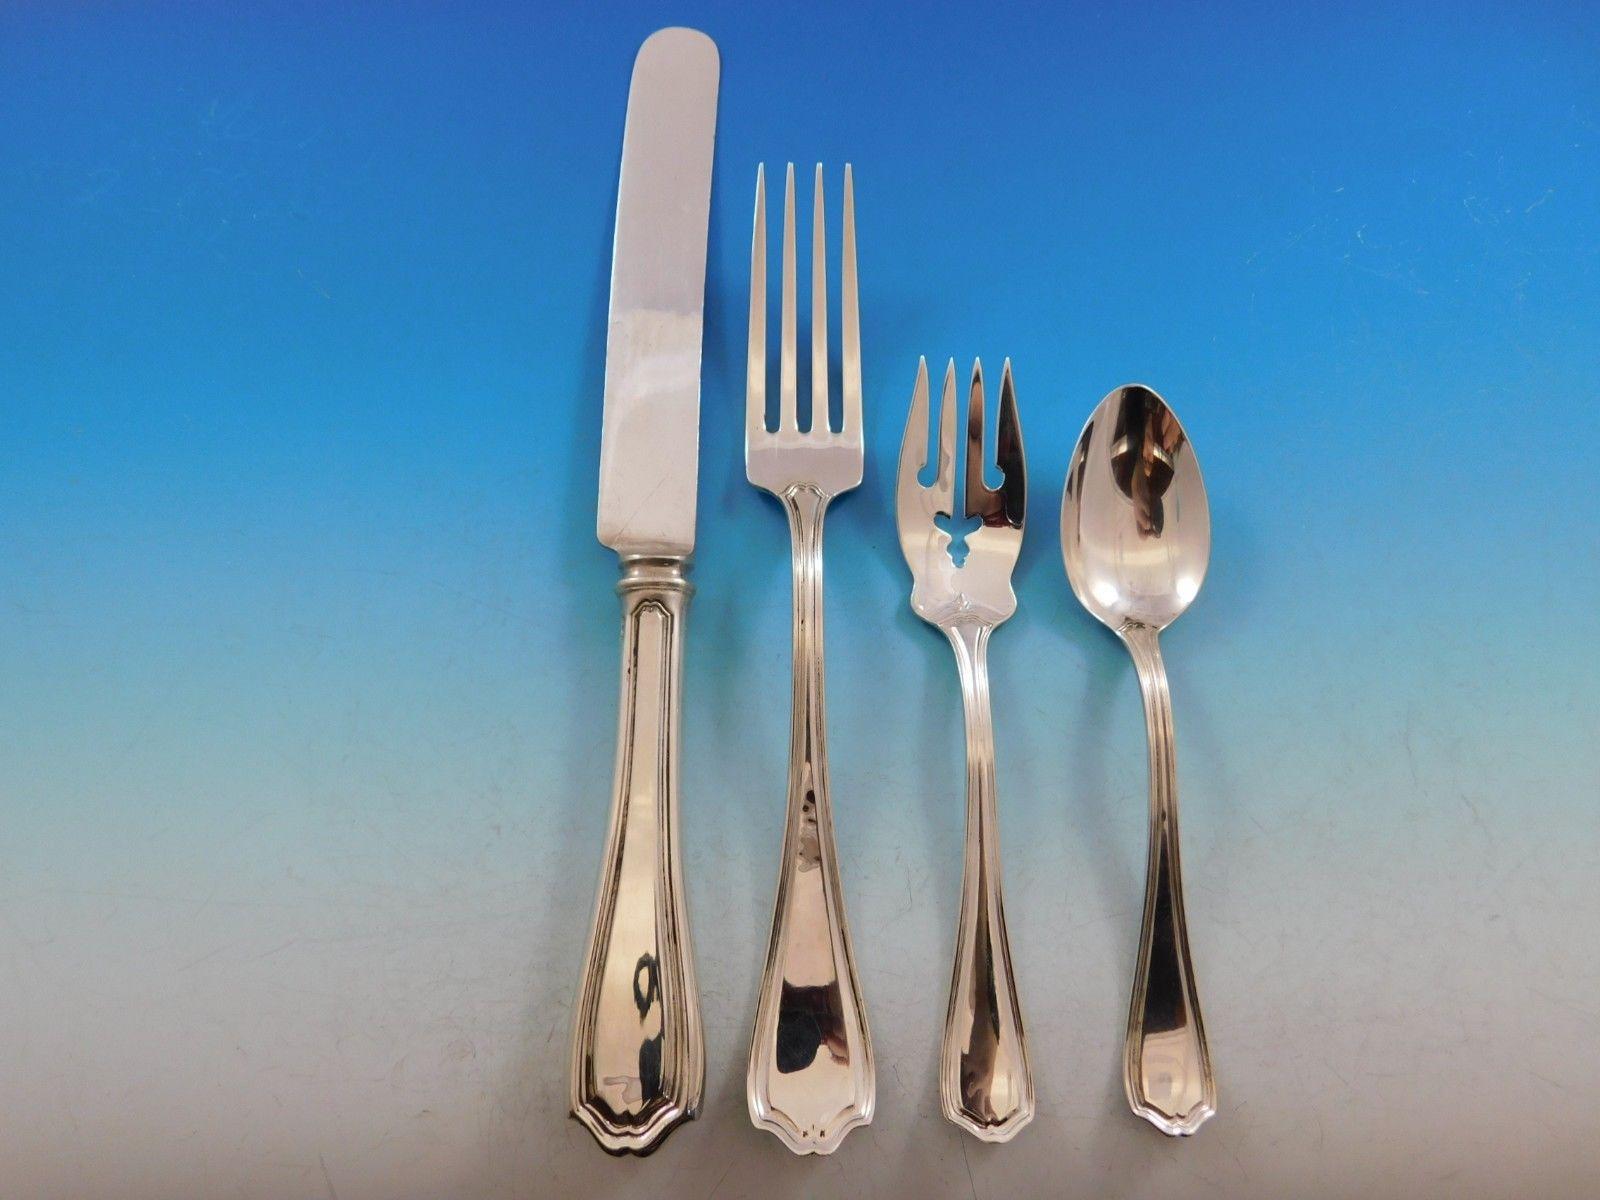 Monumental dinner and luncheon size Hepplewhite by Reed & Barton sterling silver flatware set, 129 pieces. This tailored, timeless pattern is a best seller. This set includes:

12 dinner size knives, 10